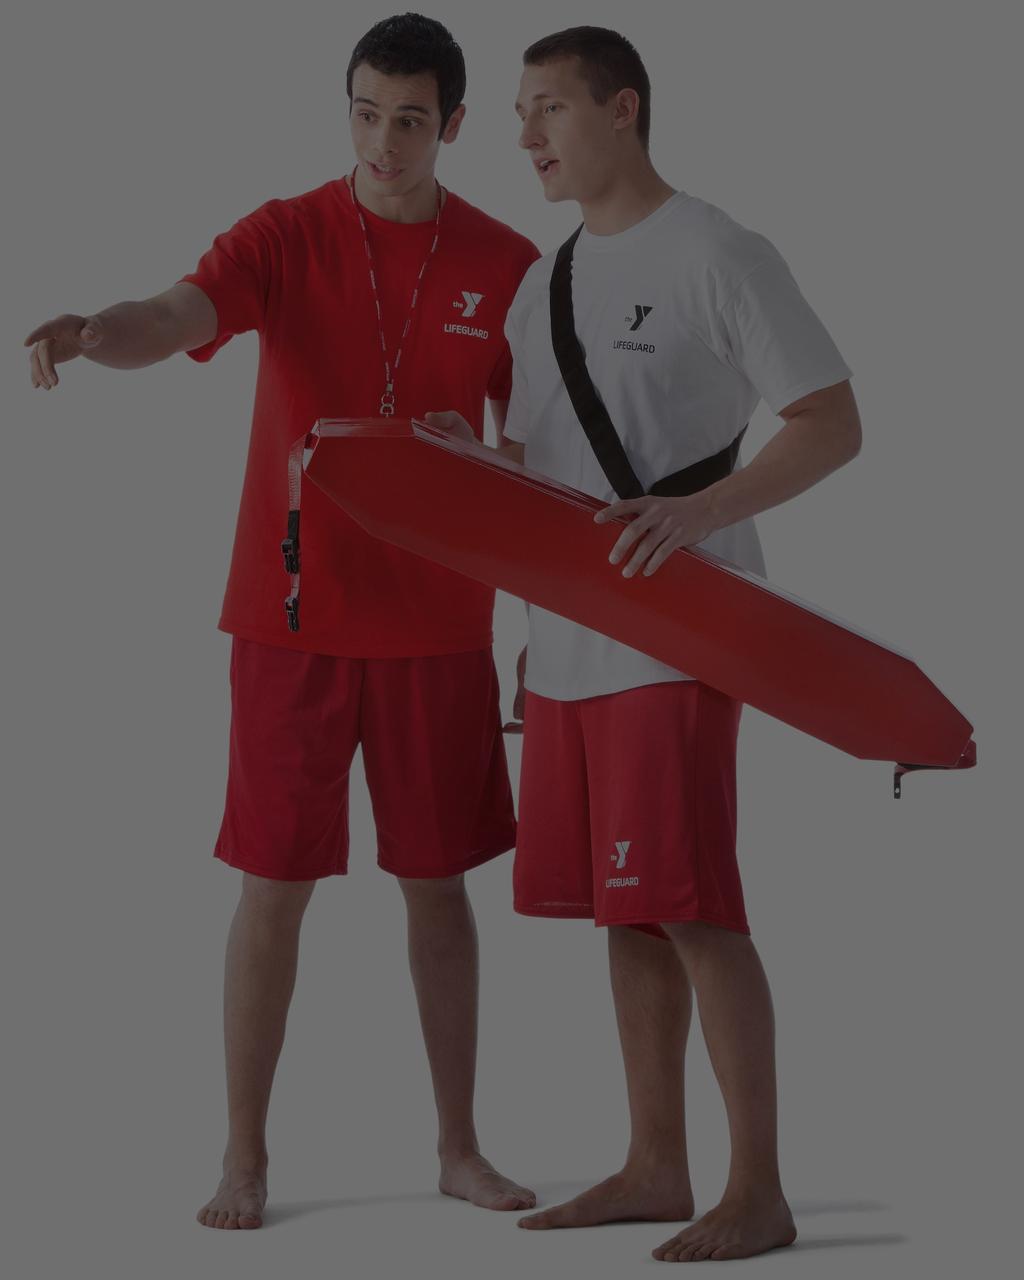 SAFE Y FIRST AMERICAN RED CROSS LIFEGUARD CERTIFICATION CLASSES American Red Cross Water Safety Instructor (WSI) The purpose of the American Red Cross Lifeguard course is to provide entry level